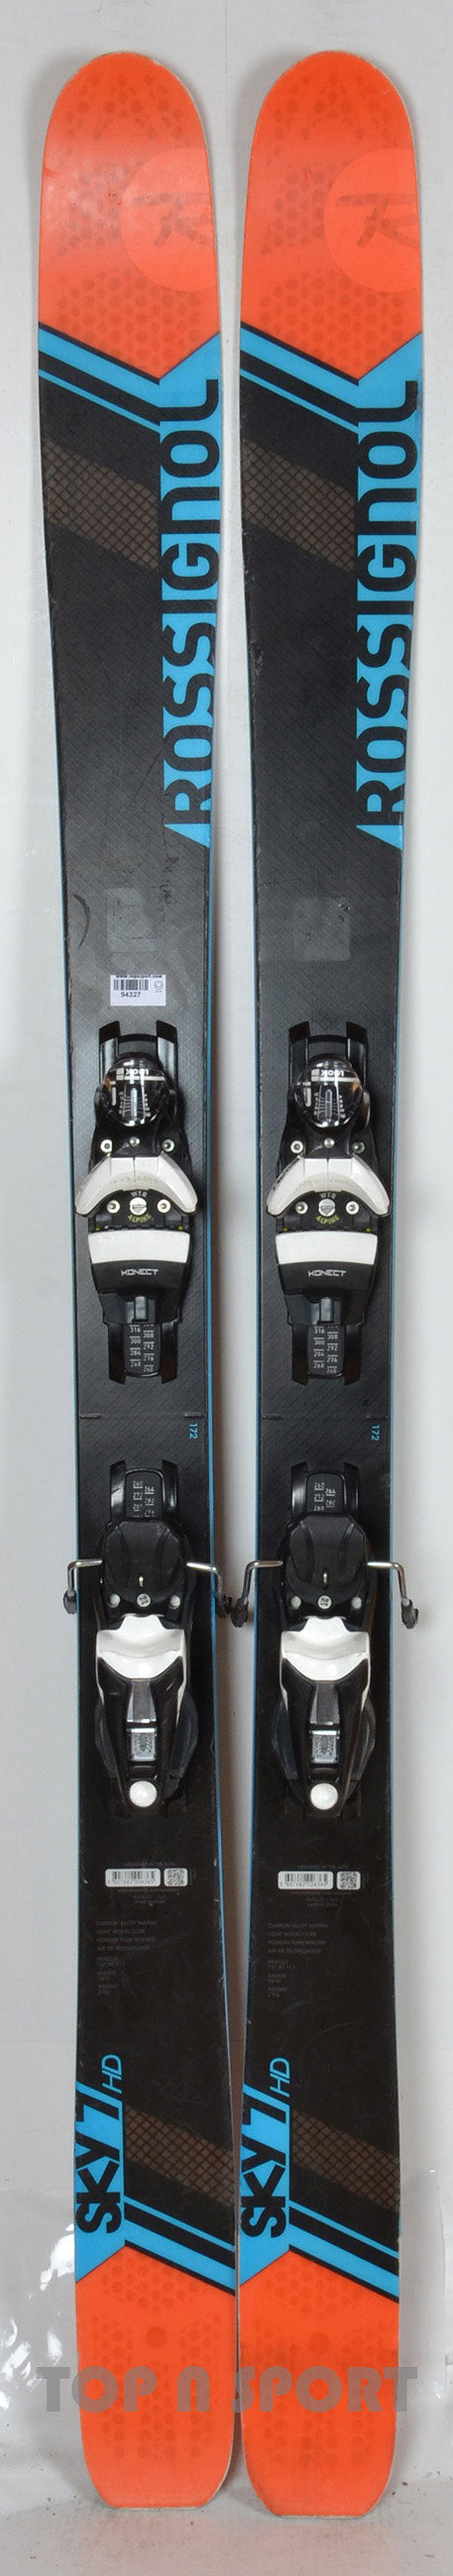 Rossignol SKY 7 HD KONECT - skis d'occasion